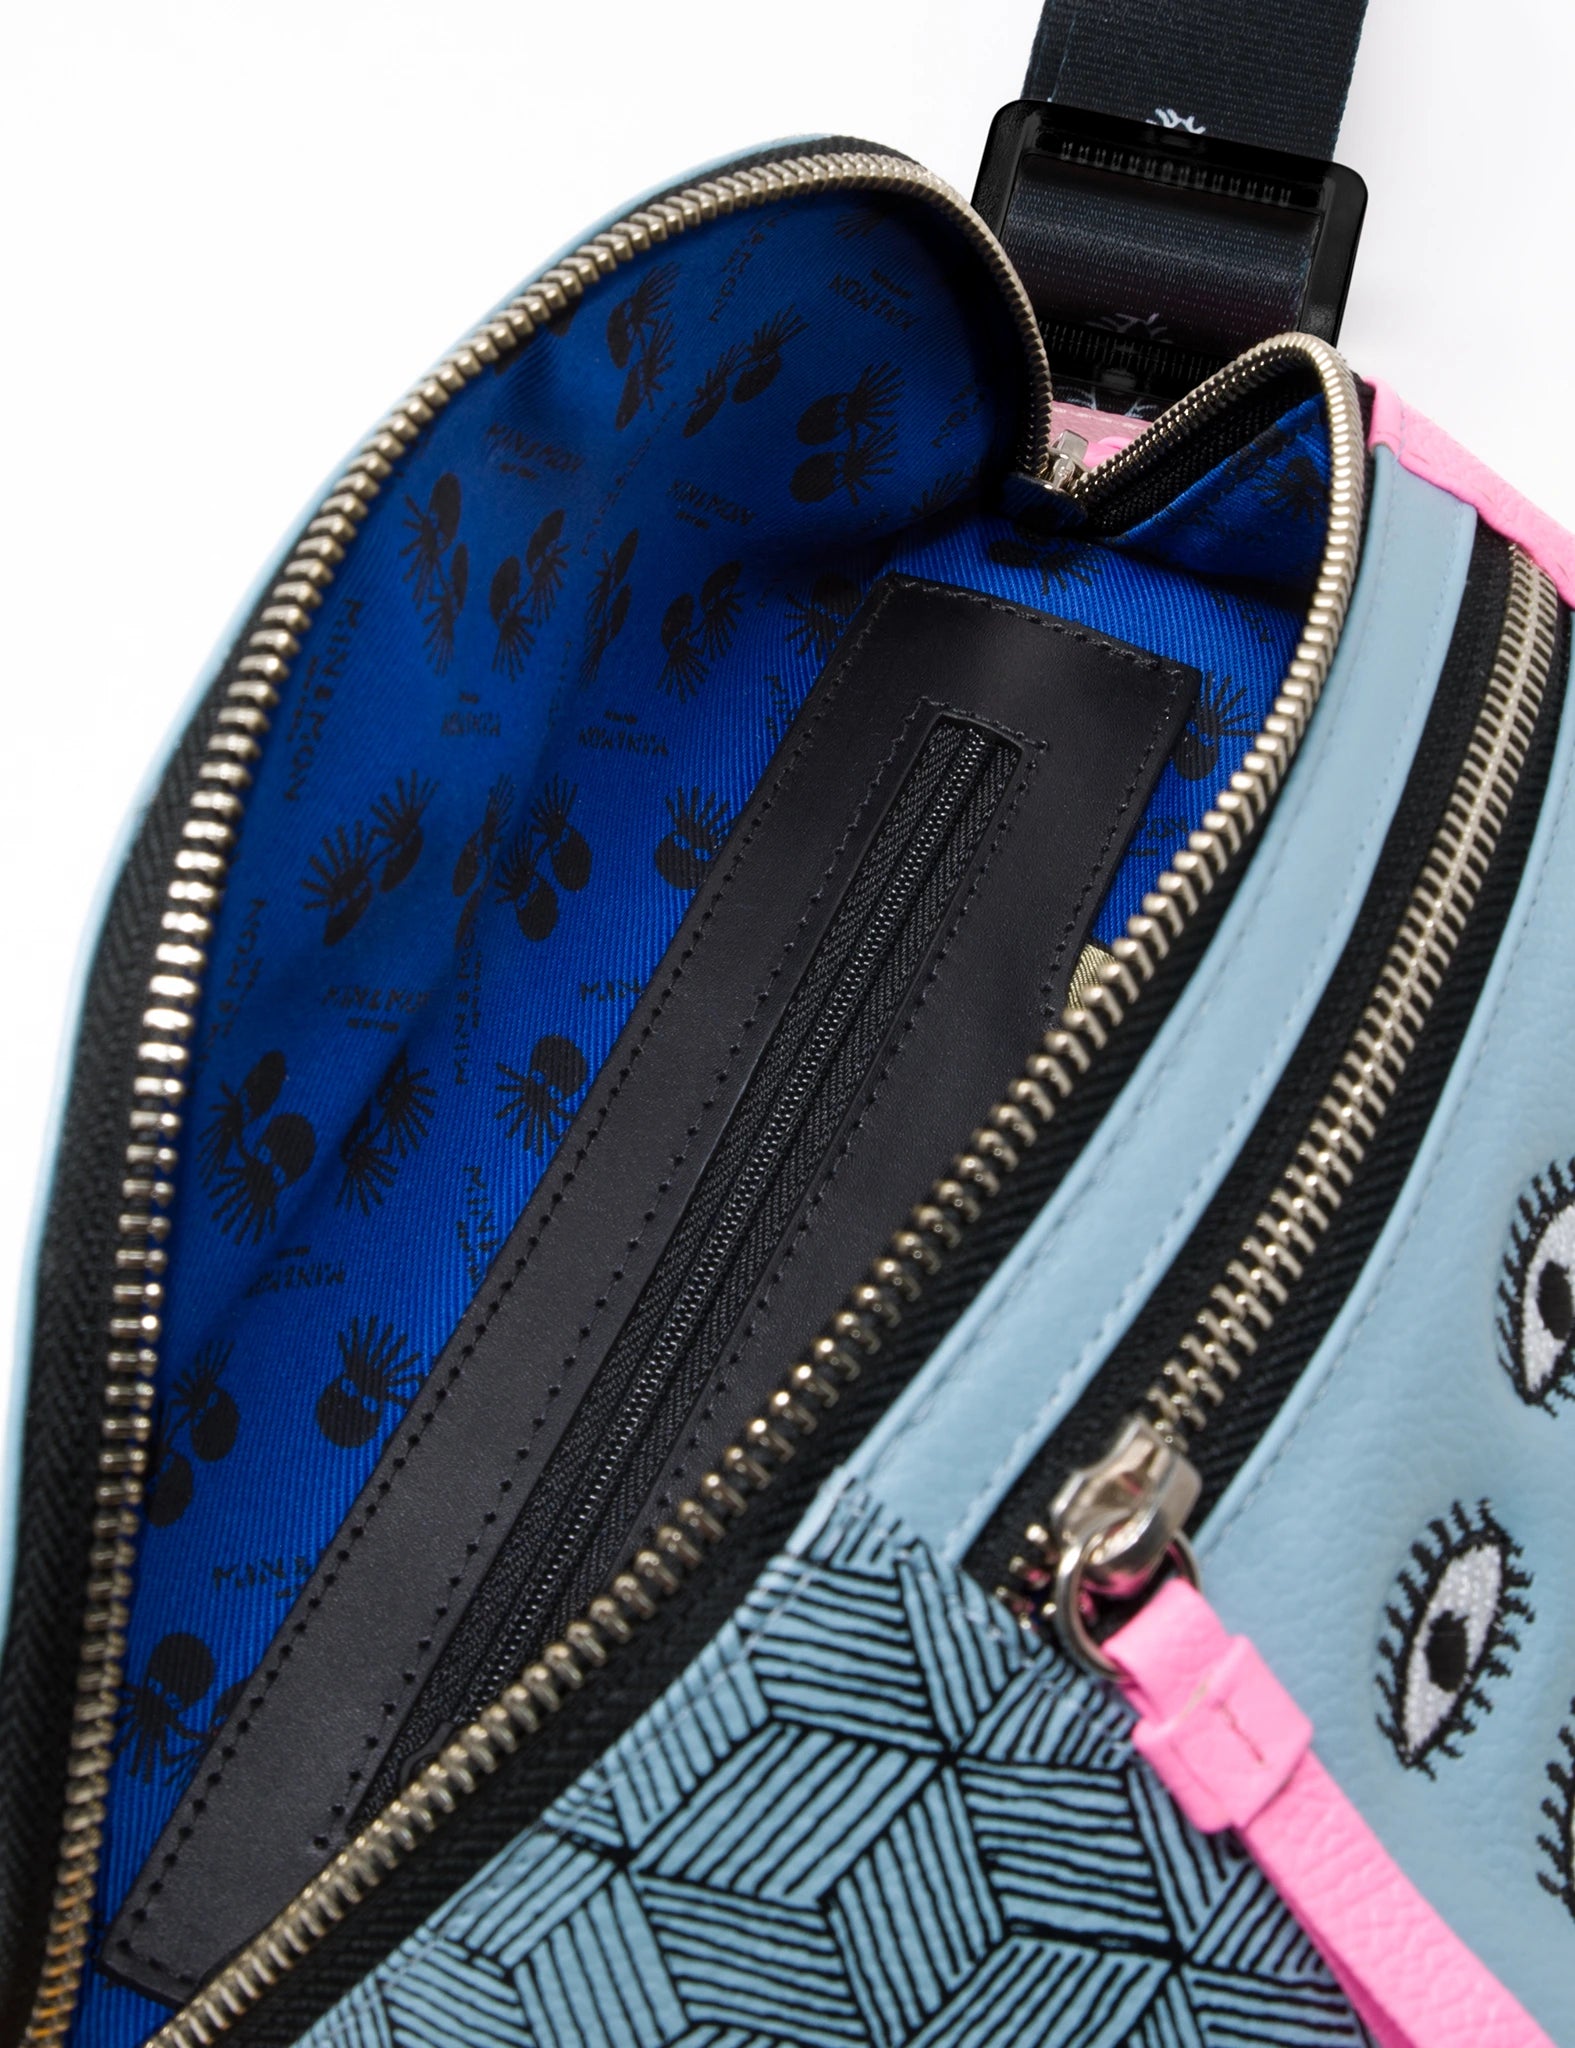 Fanny Pack Stratosphere Blue Leather - All Over Eyes Embroidery - Inside 